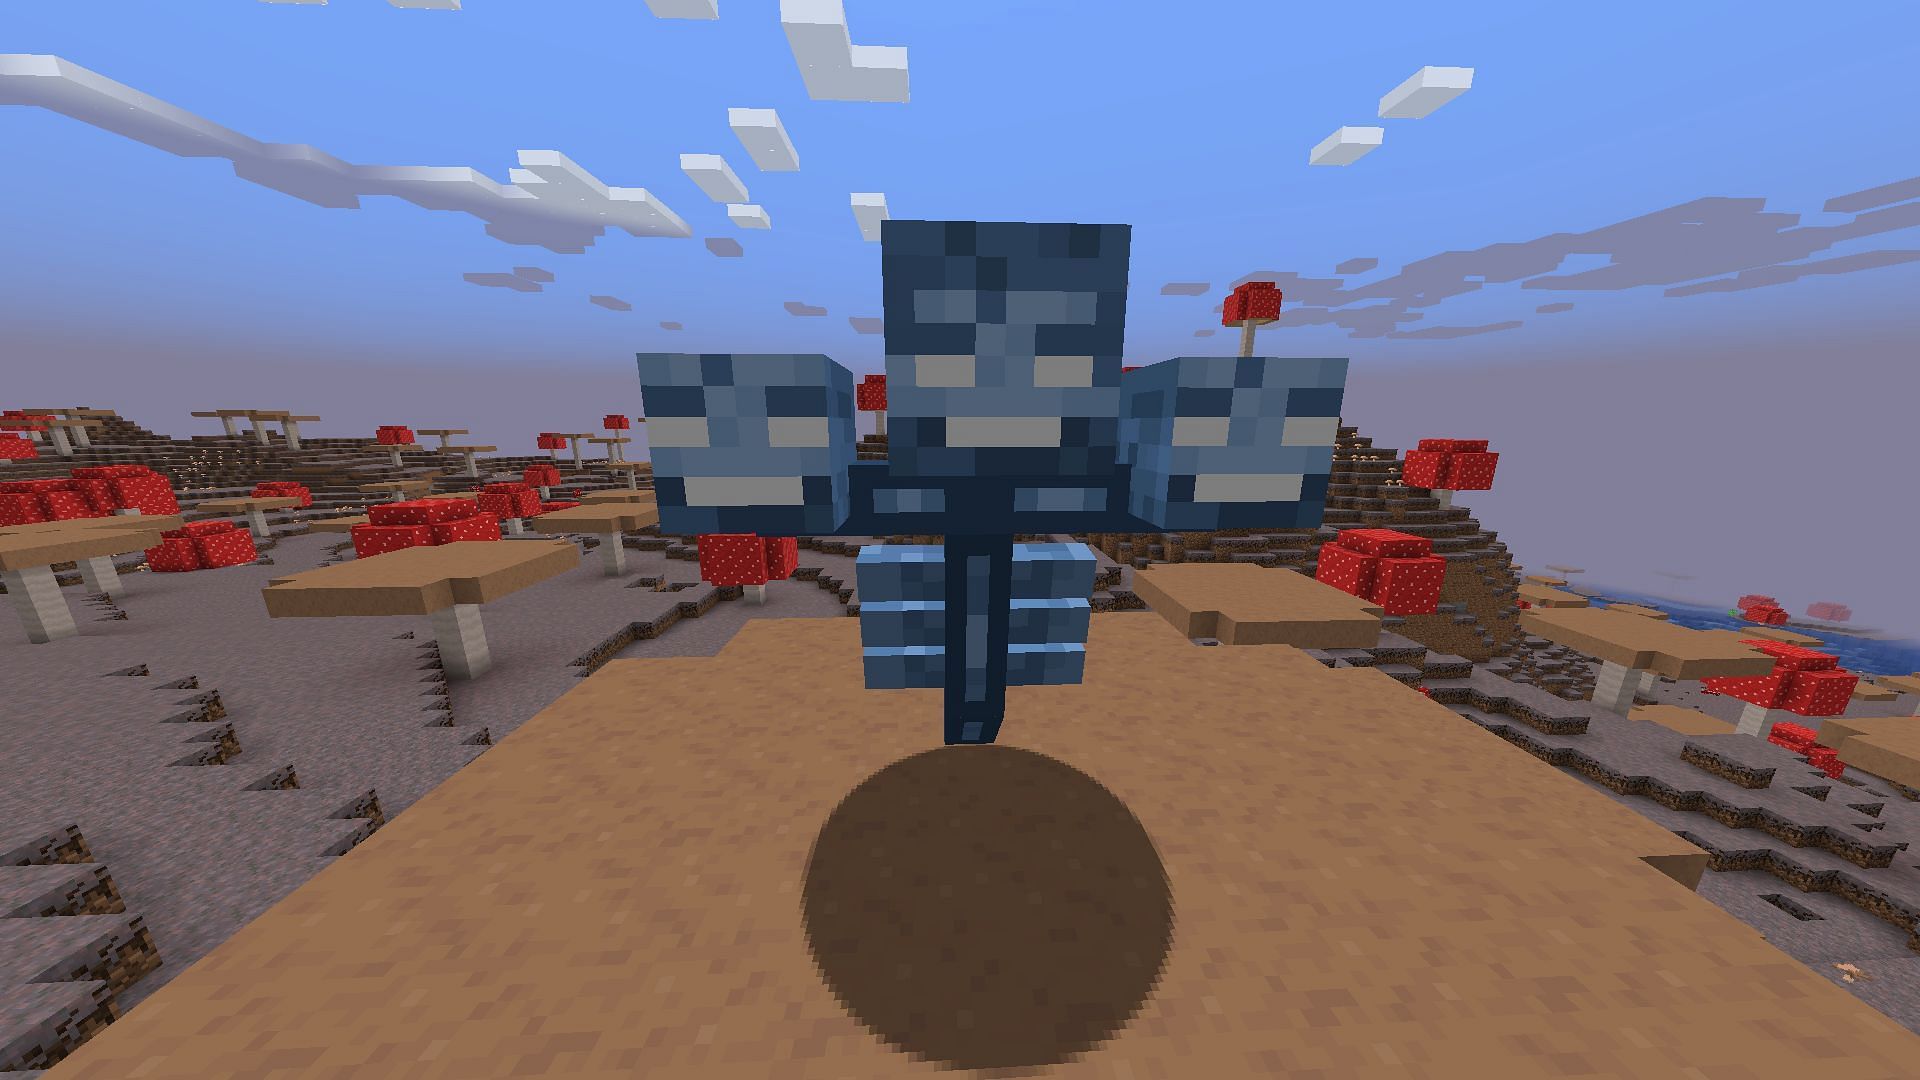 Each Wither drops one Nether Star, which can be used to build a beacon in Minecraft (Image via Mojang)